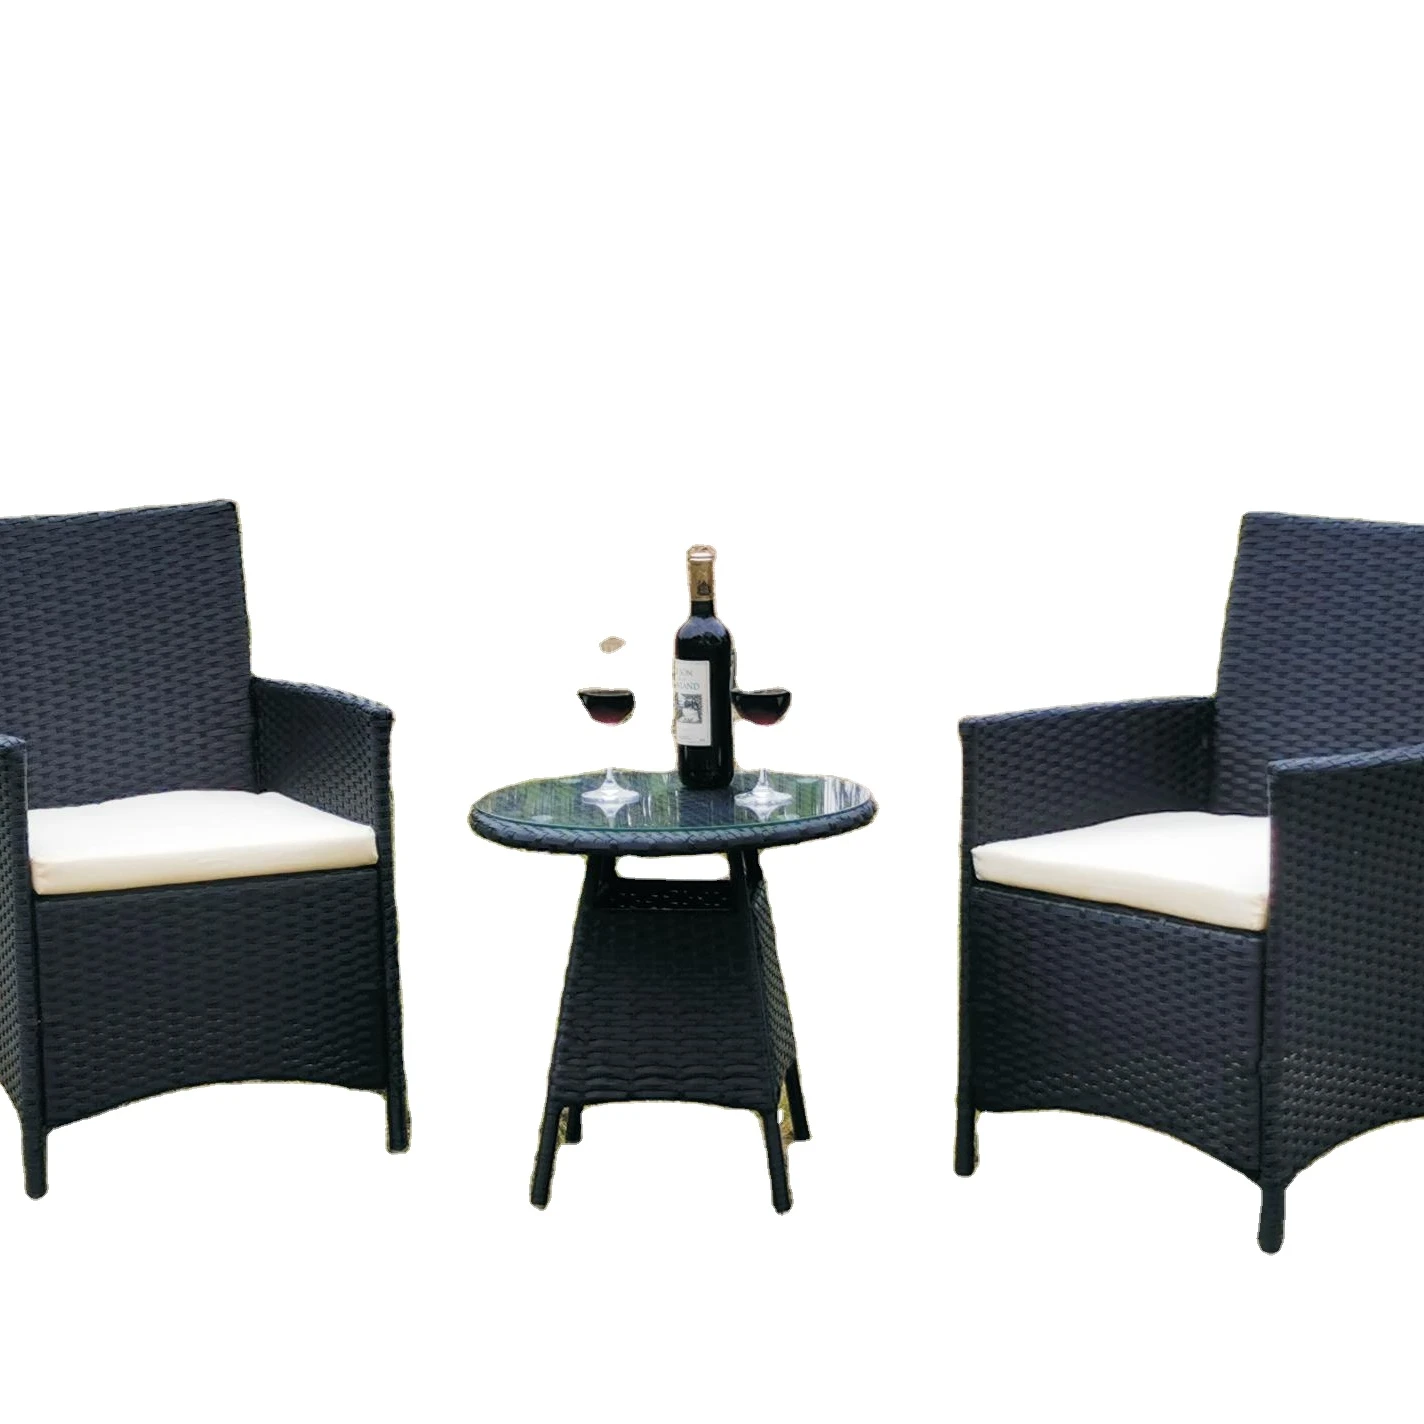 Three piece rattan chair tea table single household leisure balcony small table and chair simple combination (1600321691560)